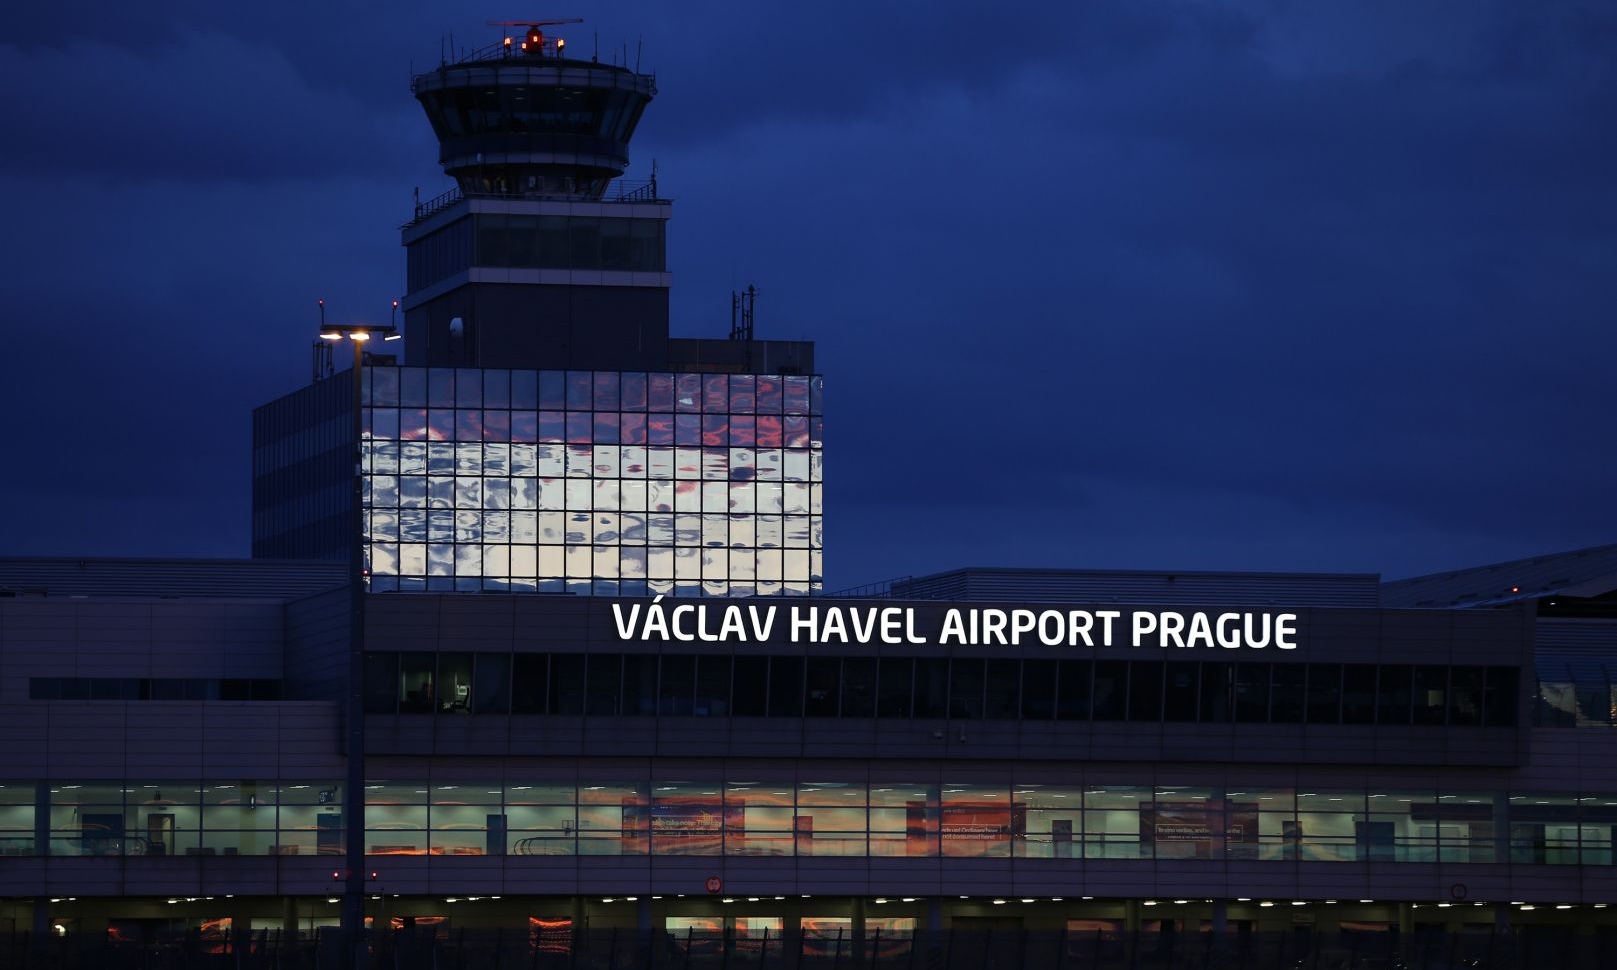 Qognify helps to ensure passengers safety and security at Václav Havel Airport Prague with Qognify